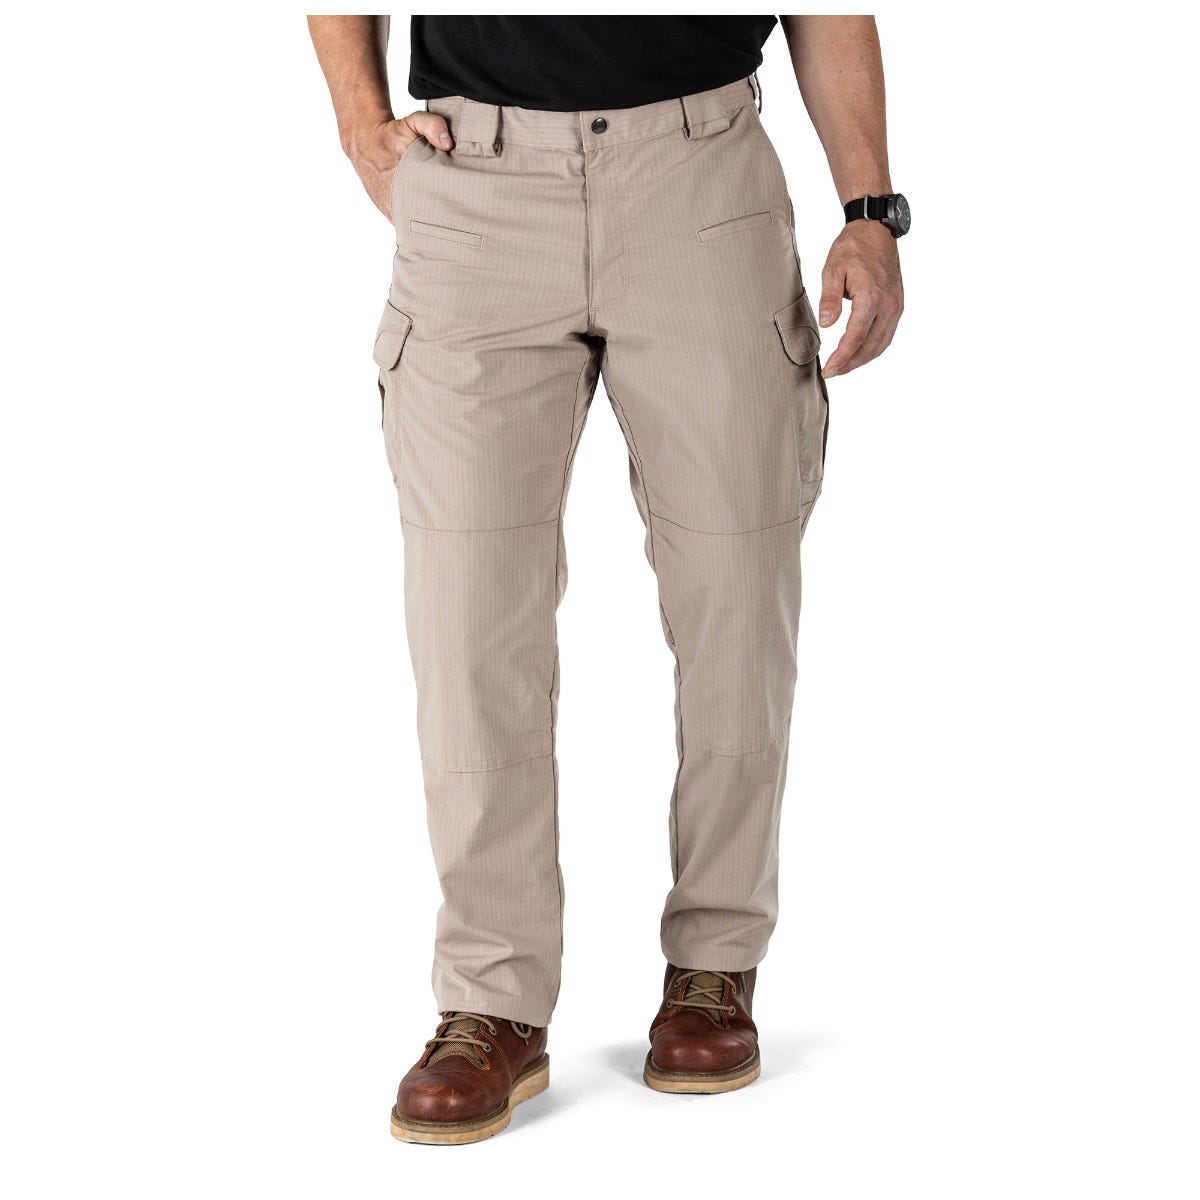 Stain- and Soil-Resistant Pant: Teflon™ coating for durability and easy maintenance.